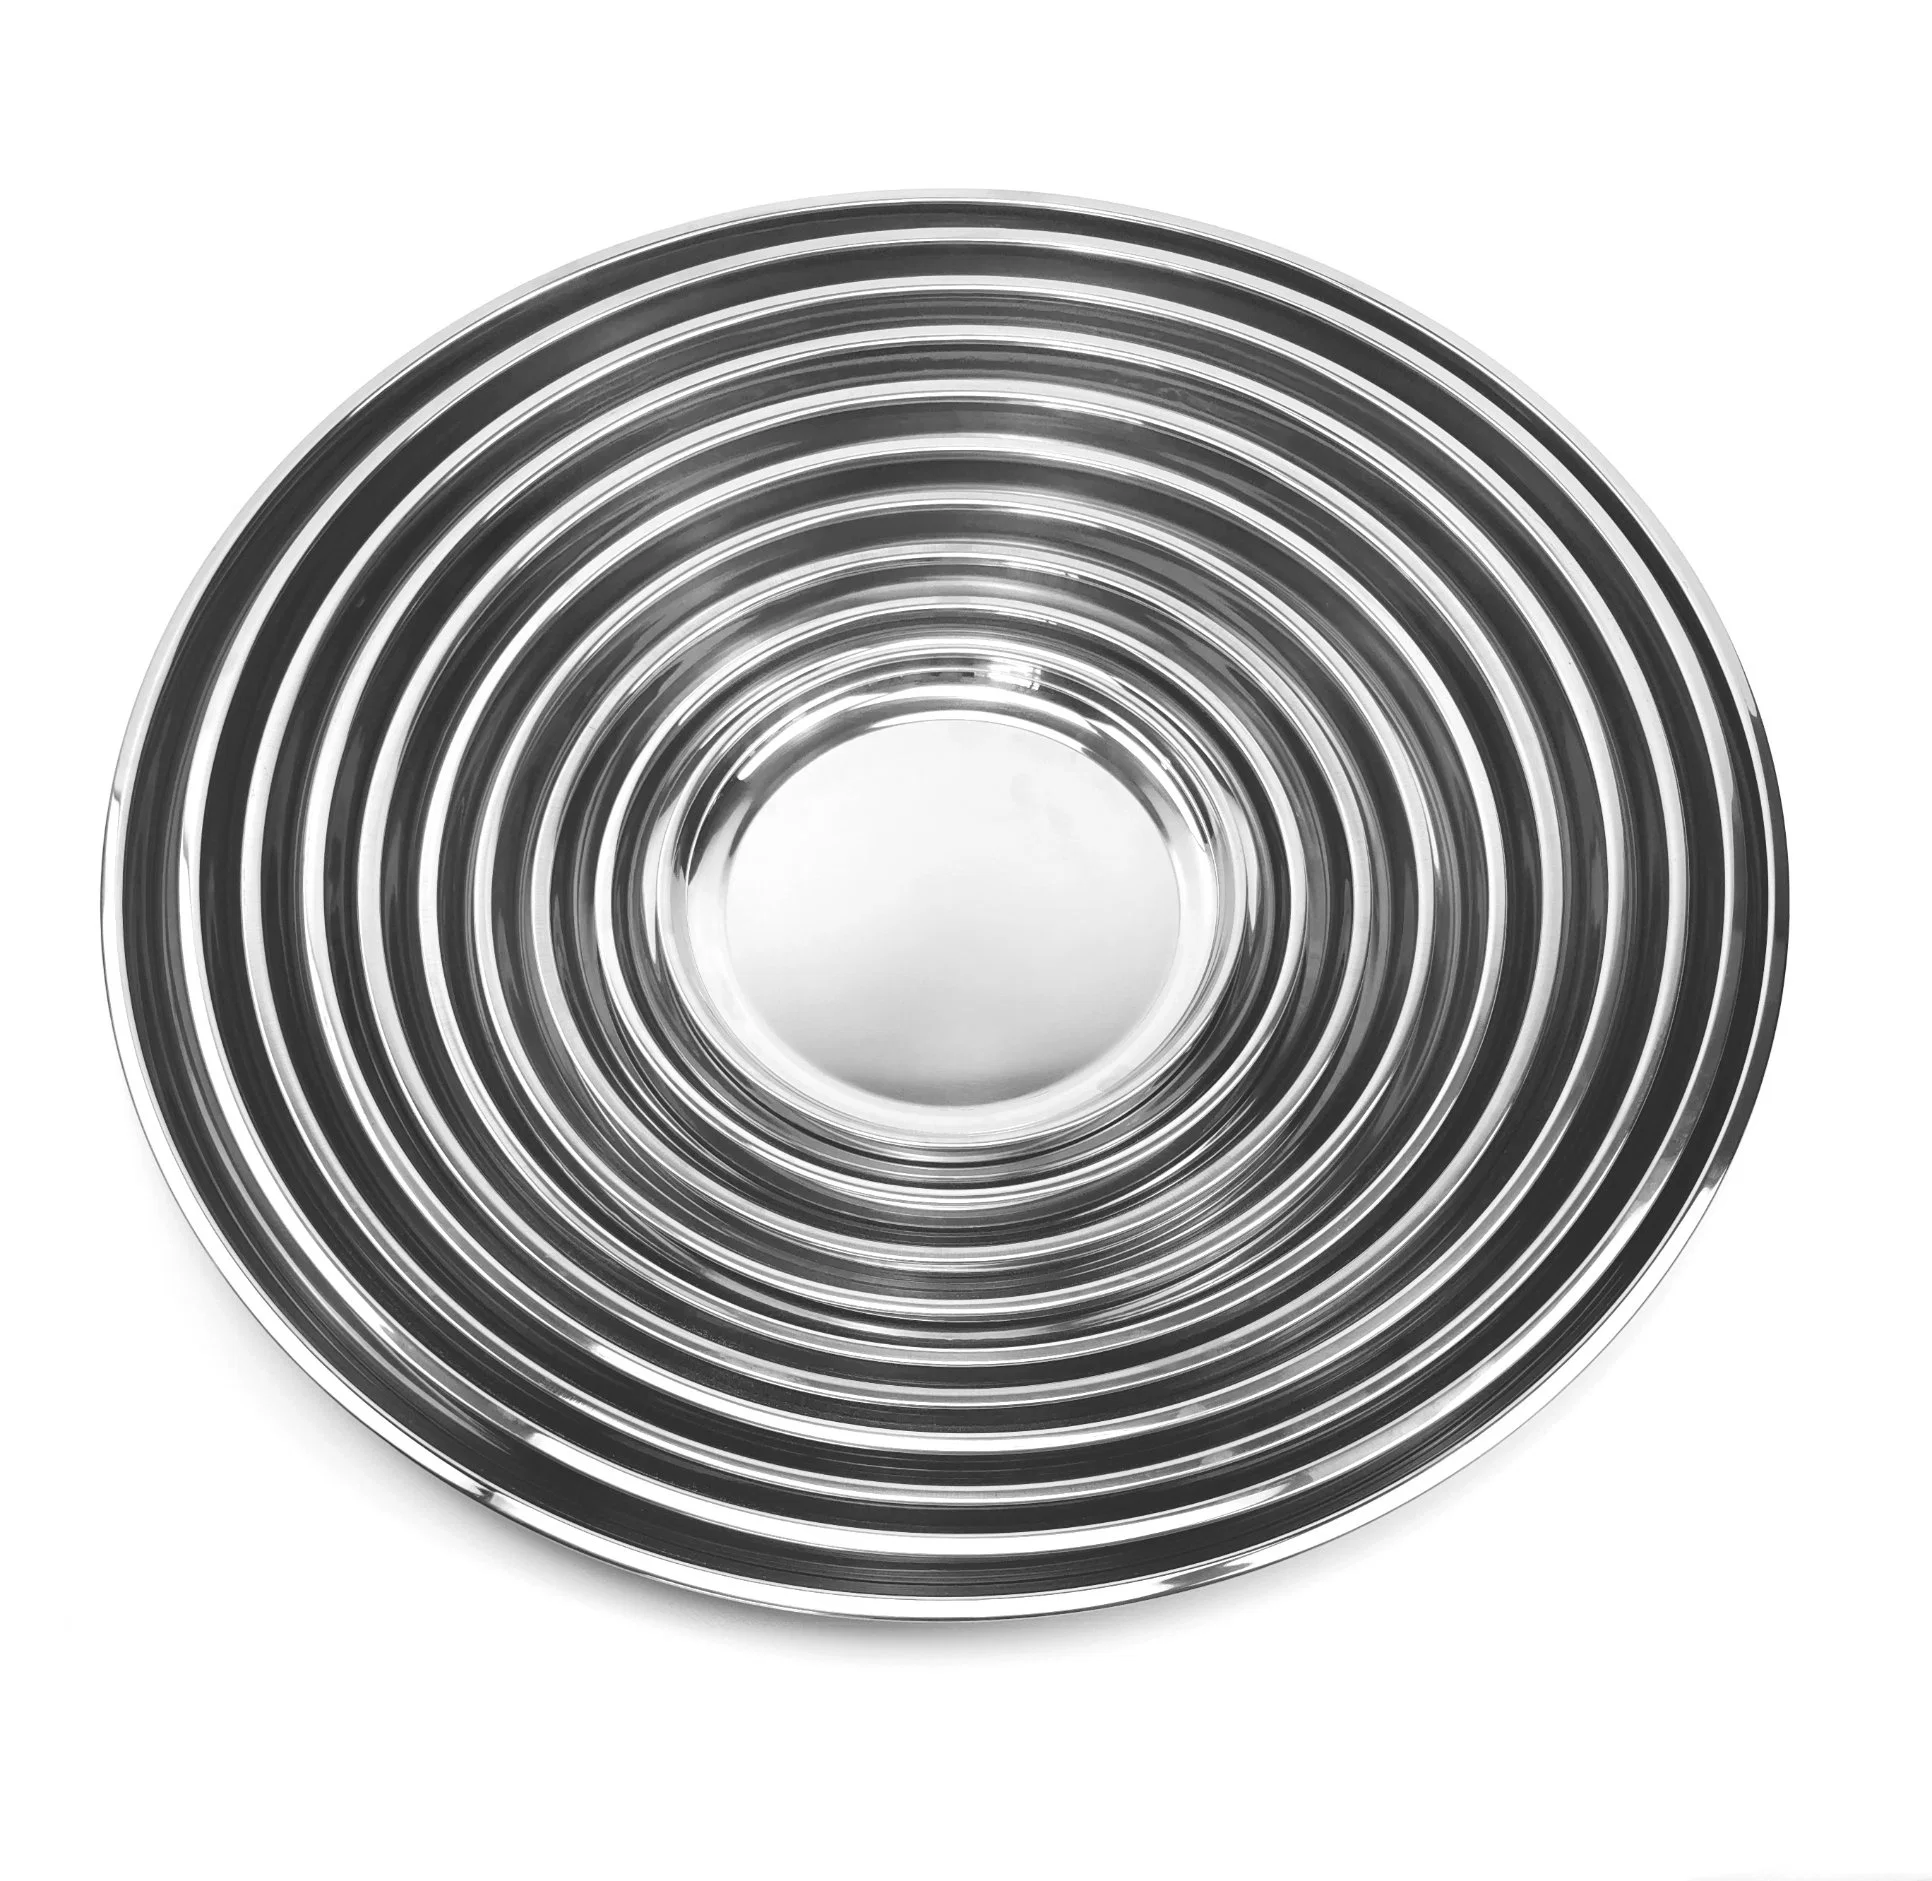 Multi Sizes 50cm, 55cm, 60cm Stainless Steel Serving Round Tray